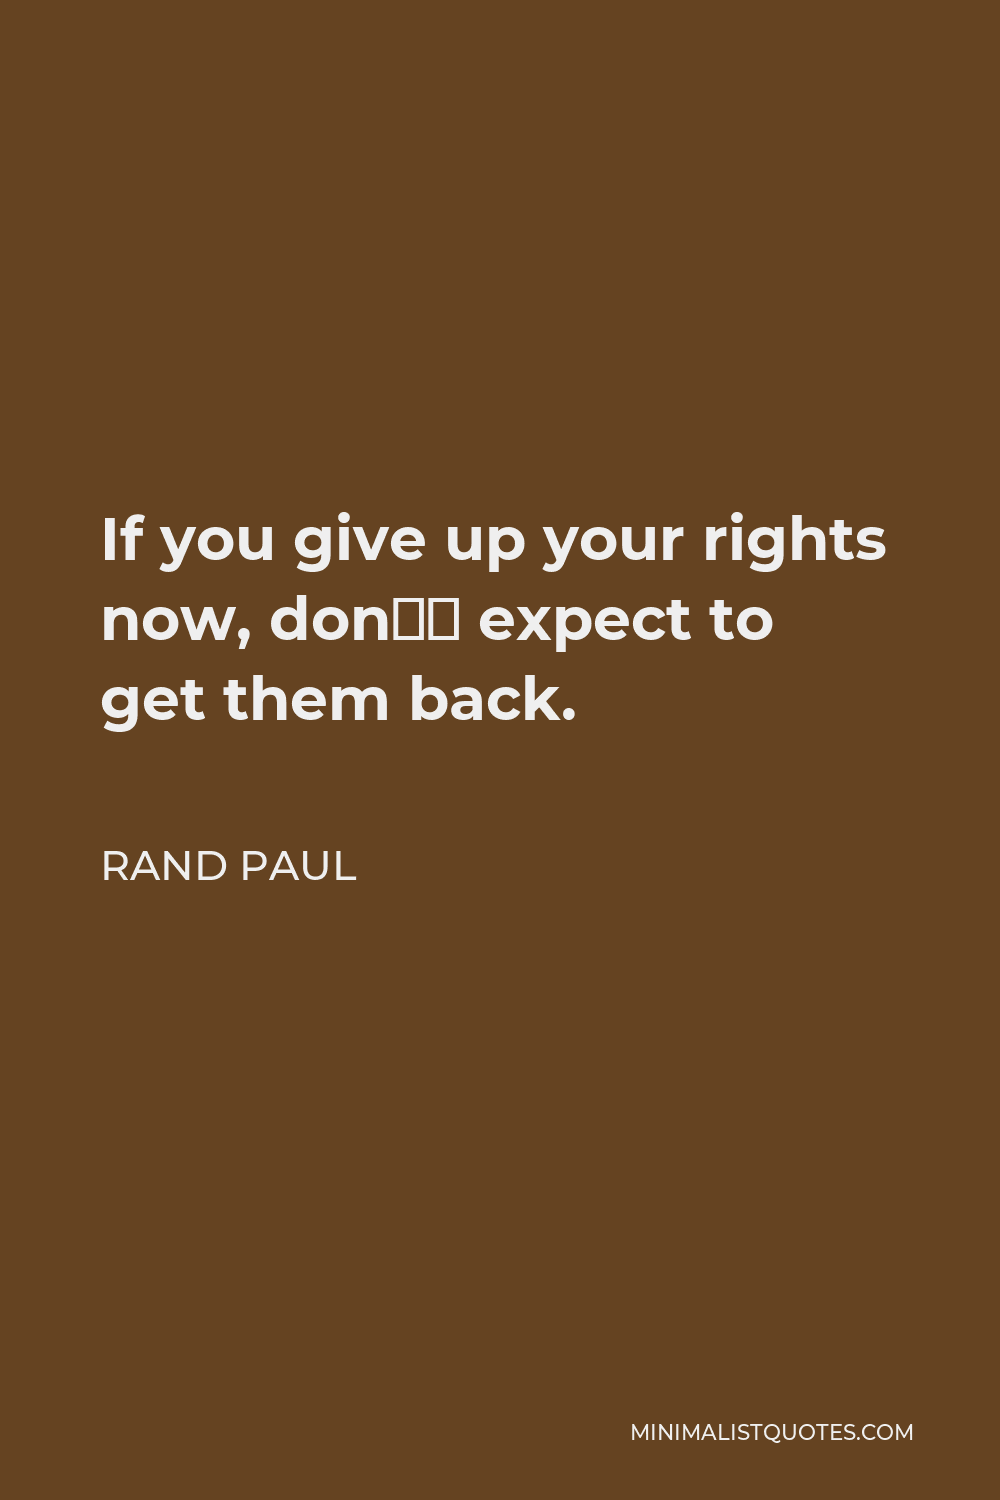 Rand Paul Quote - If you give up your rights now, don’t expect to get them back.